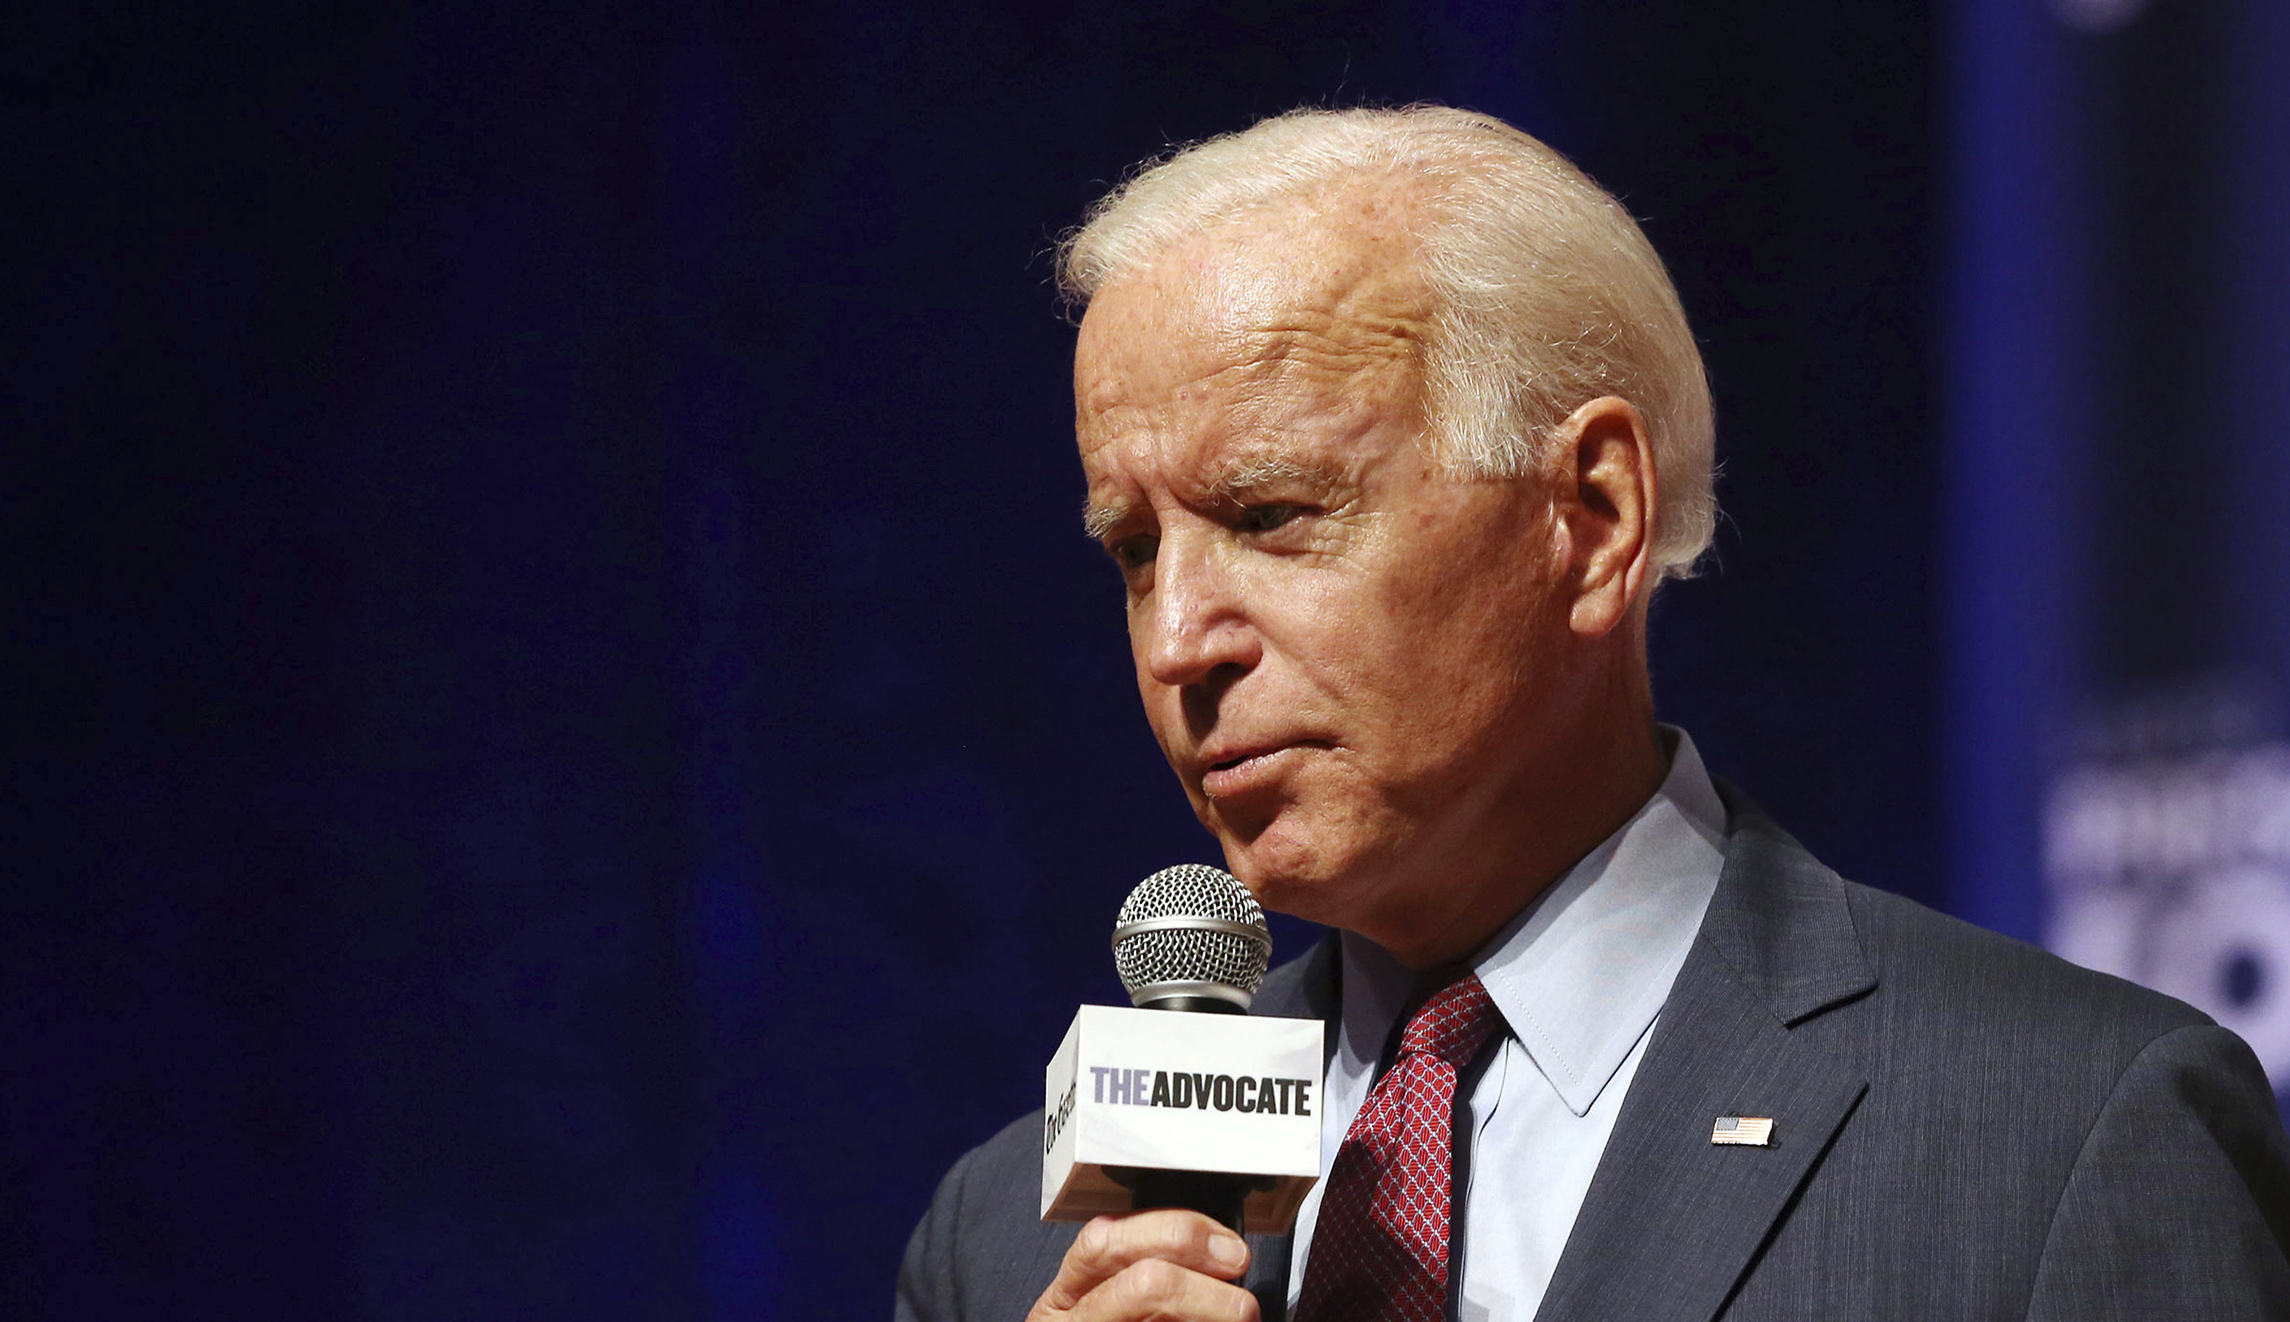 Biden aides discover second trove of classified documents: Report - Washington Examiner